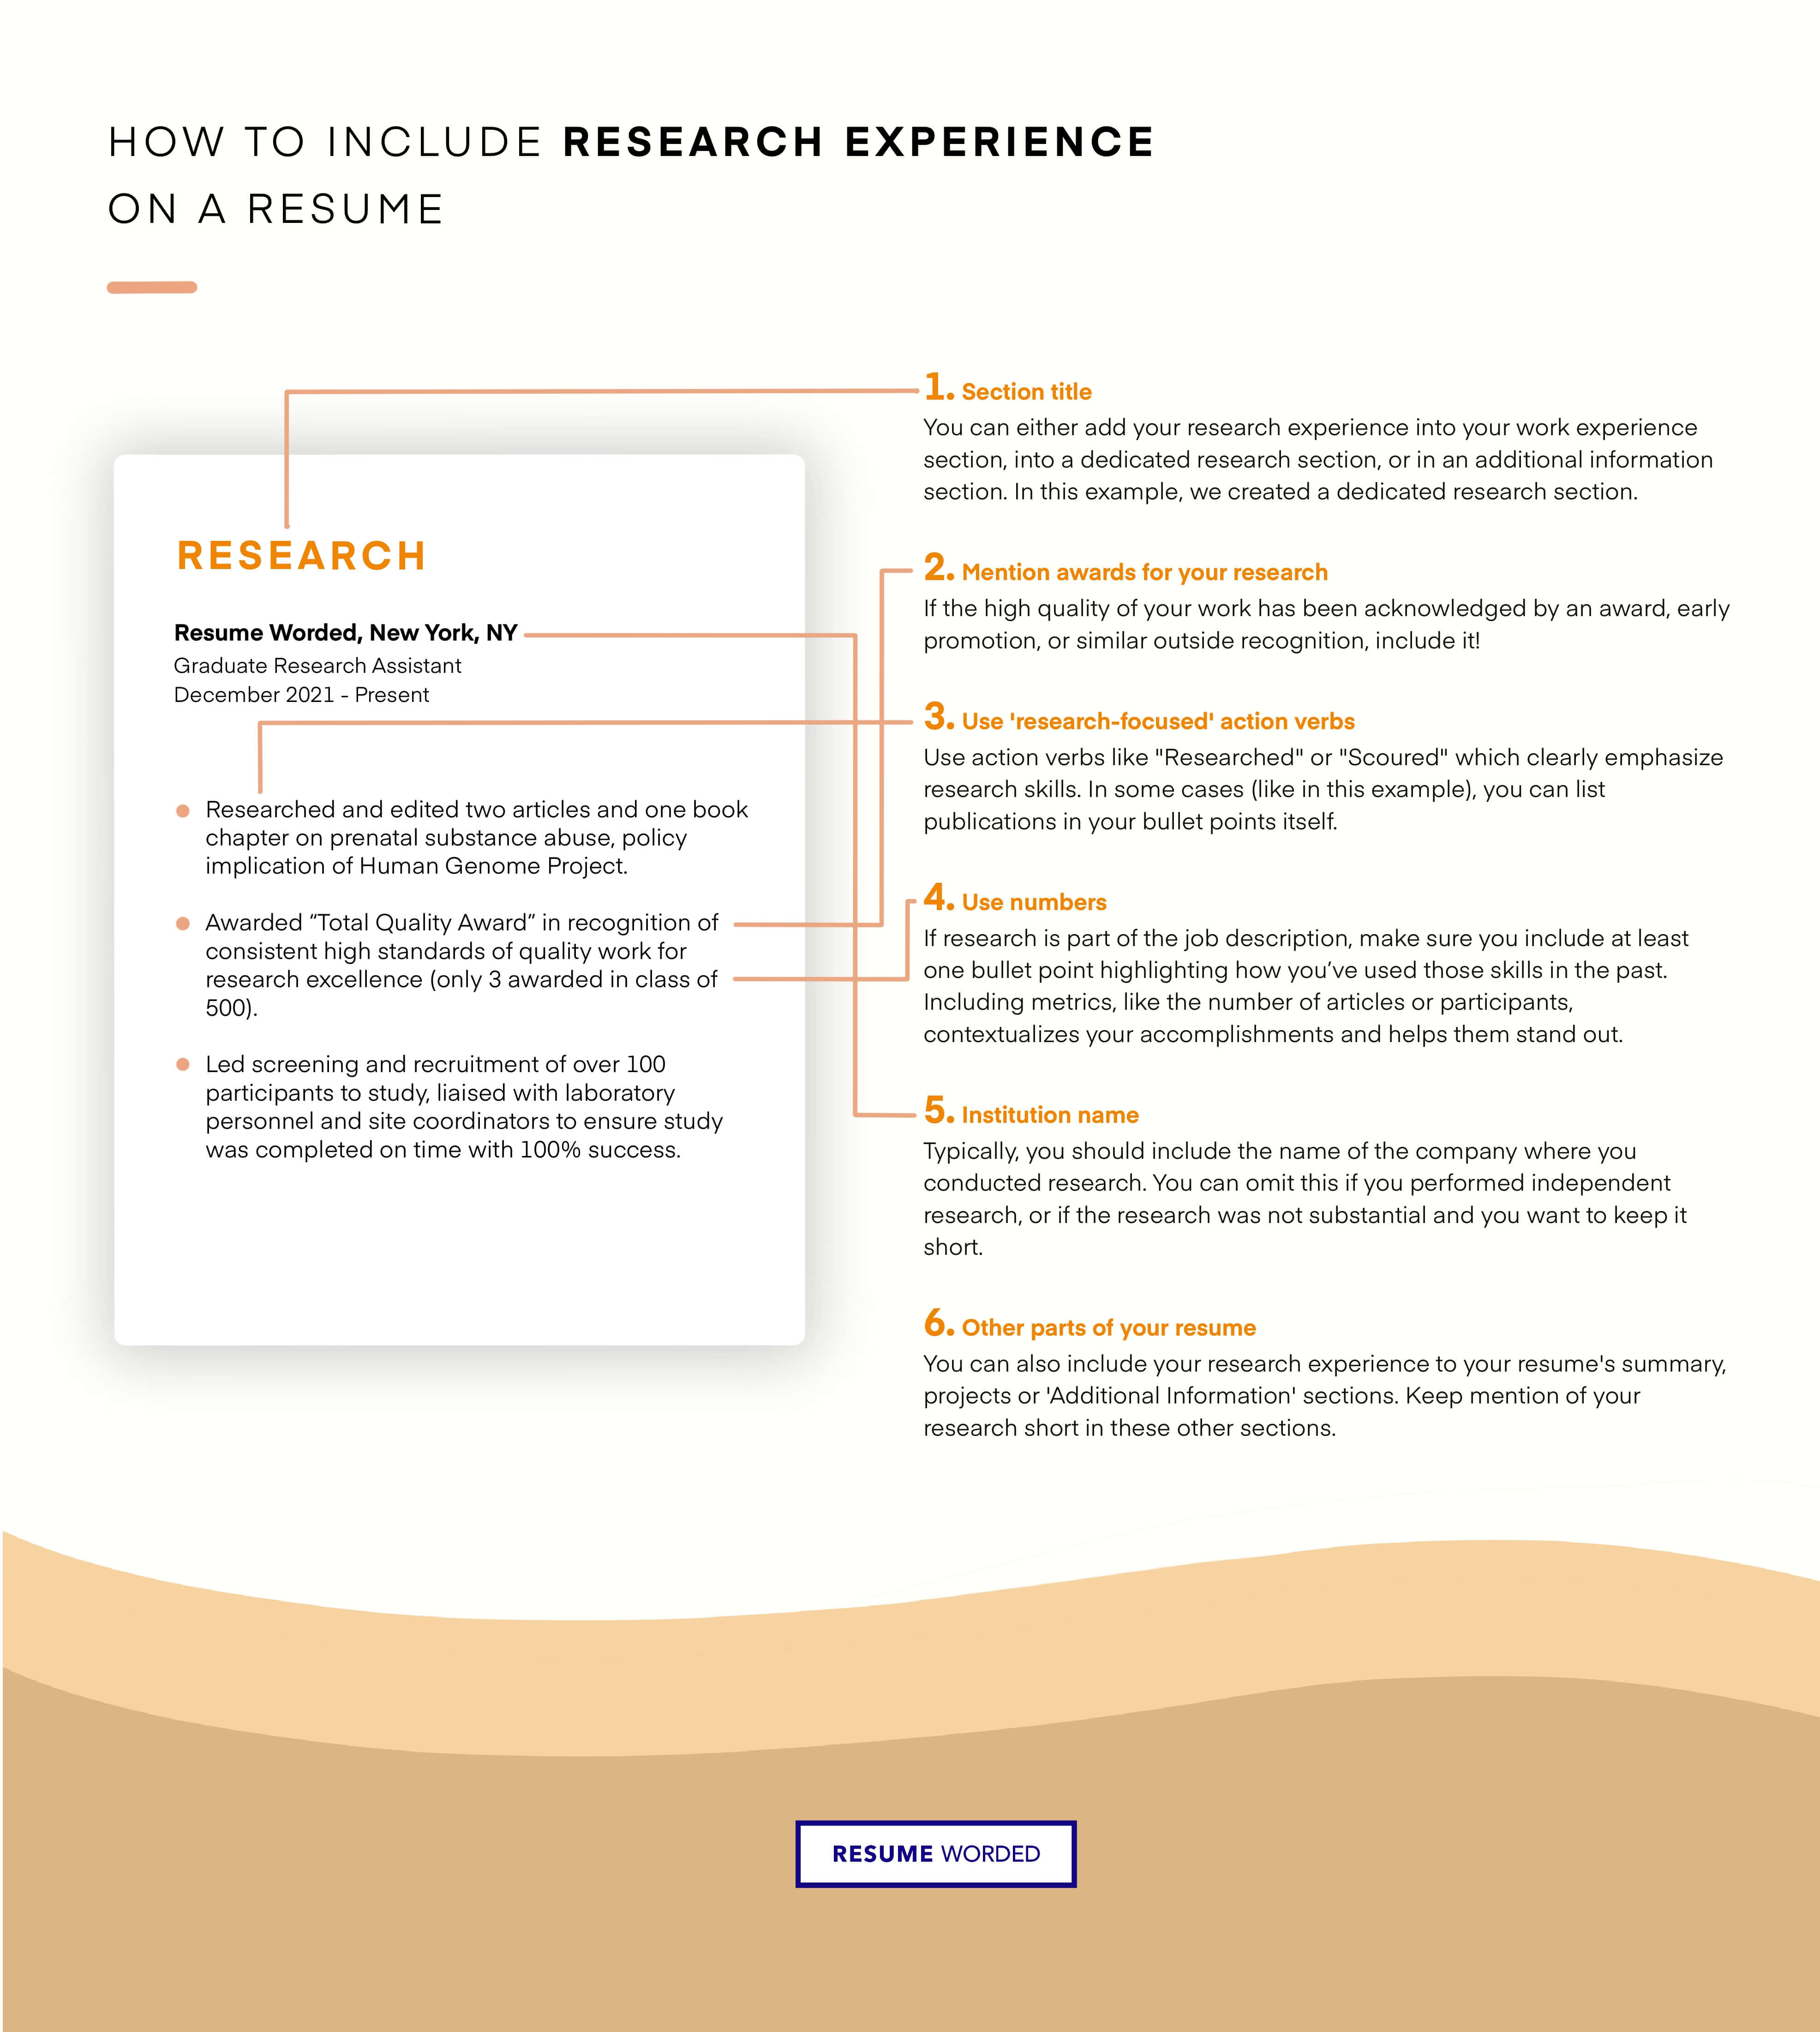 Show previous experience analyzing data and research to stand out as a brand strategist - Brand Strategist Resume